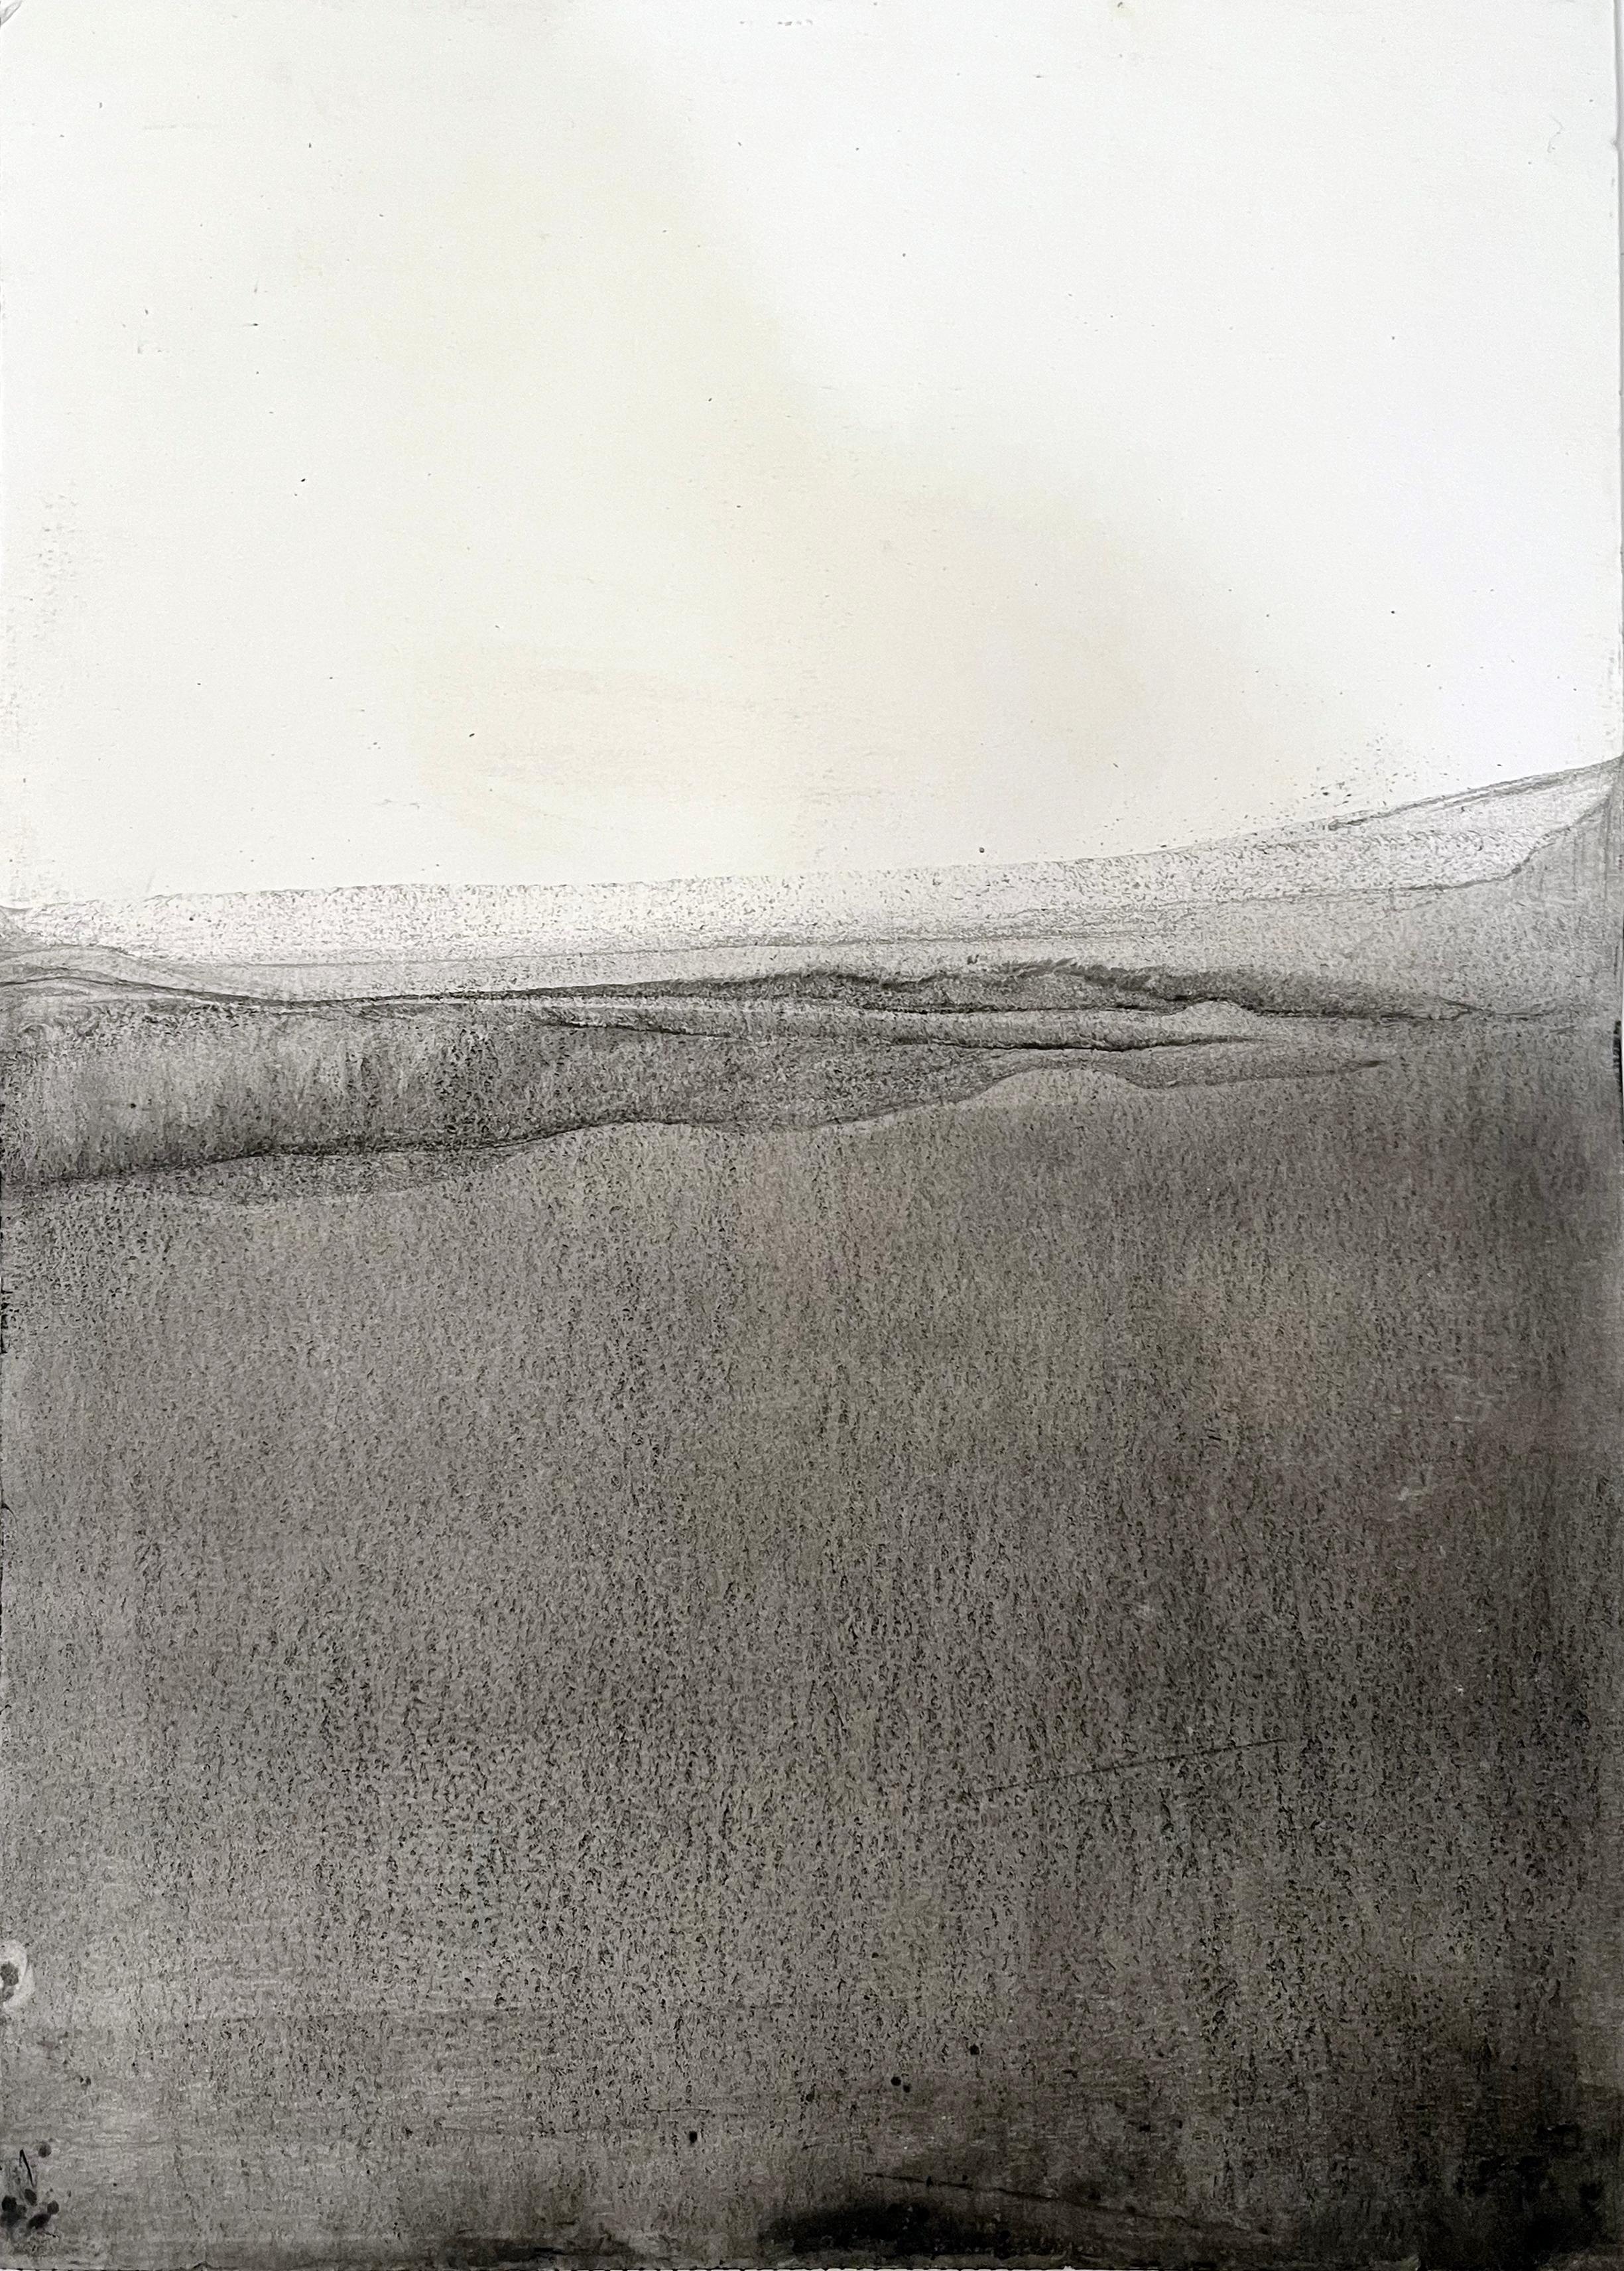 Marilina Marchica Landscape Art - "Black and White Landscape"  Abstract Drawing , Made in Italy